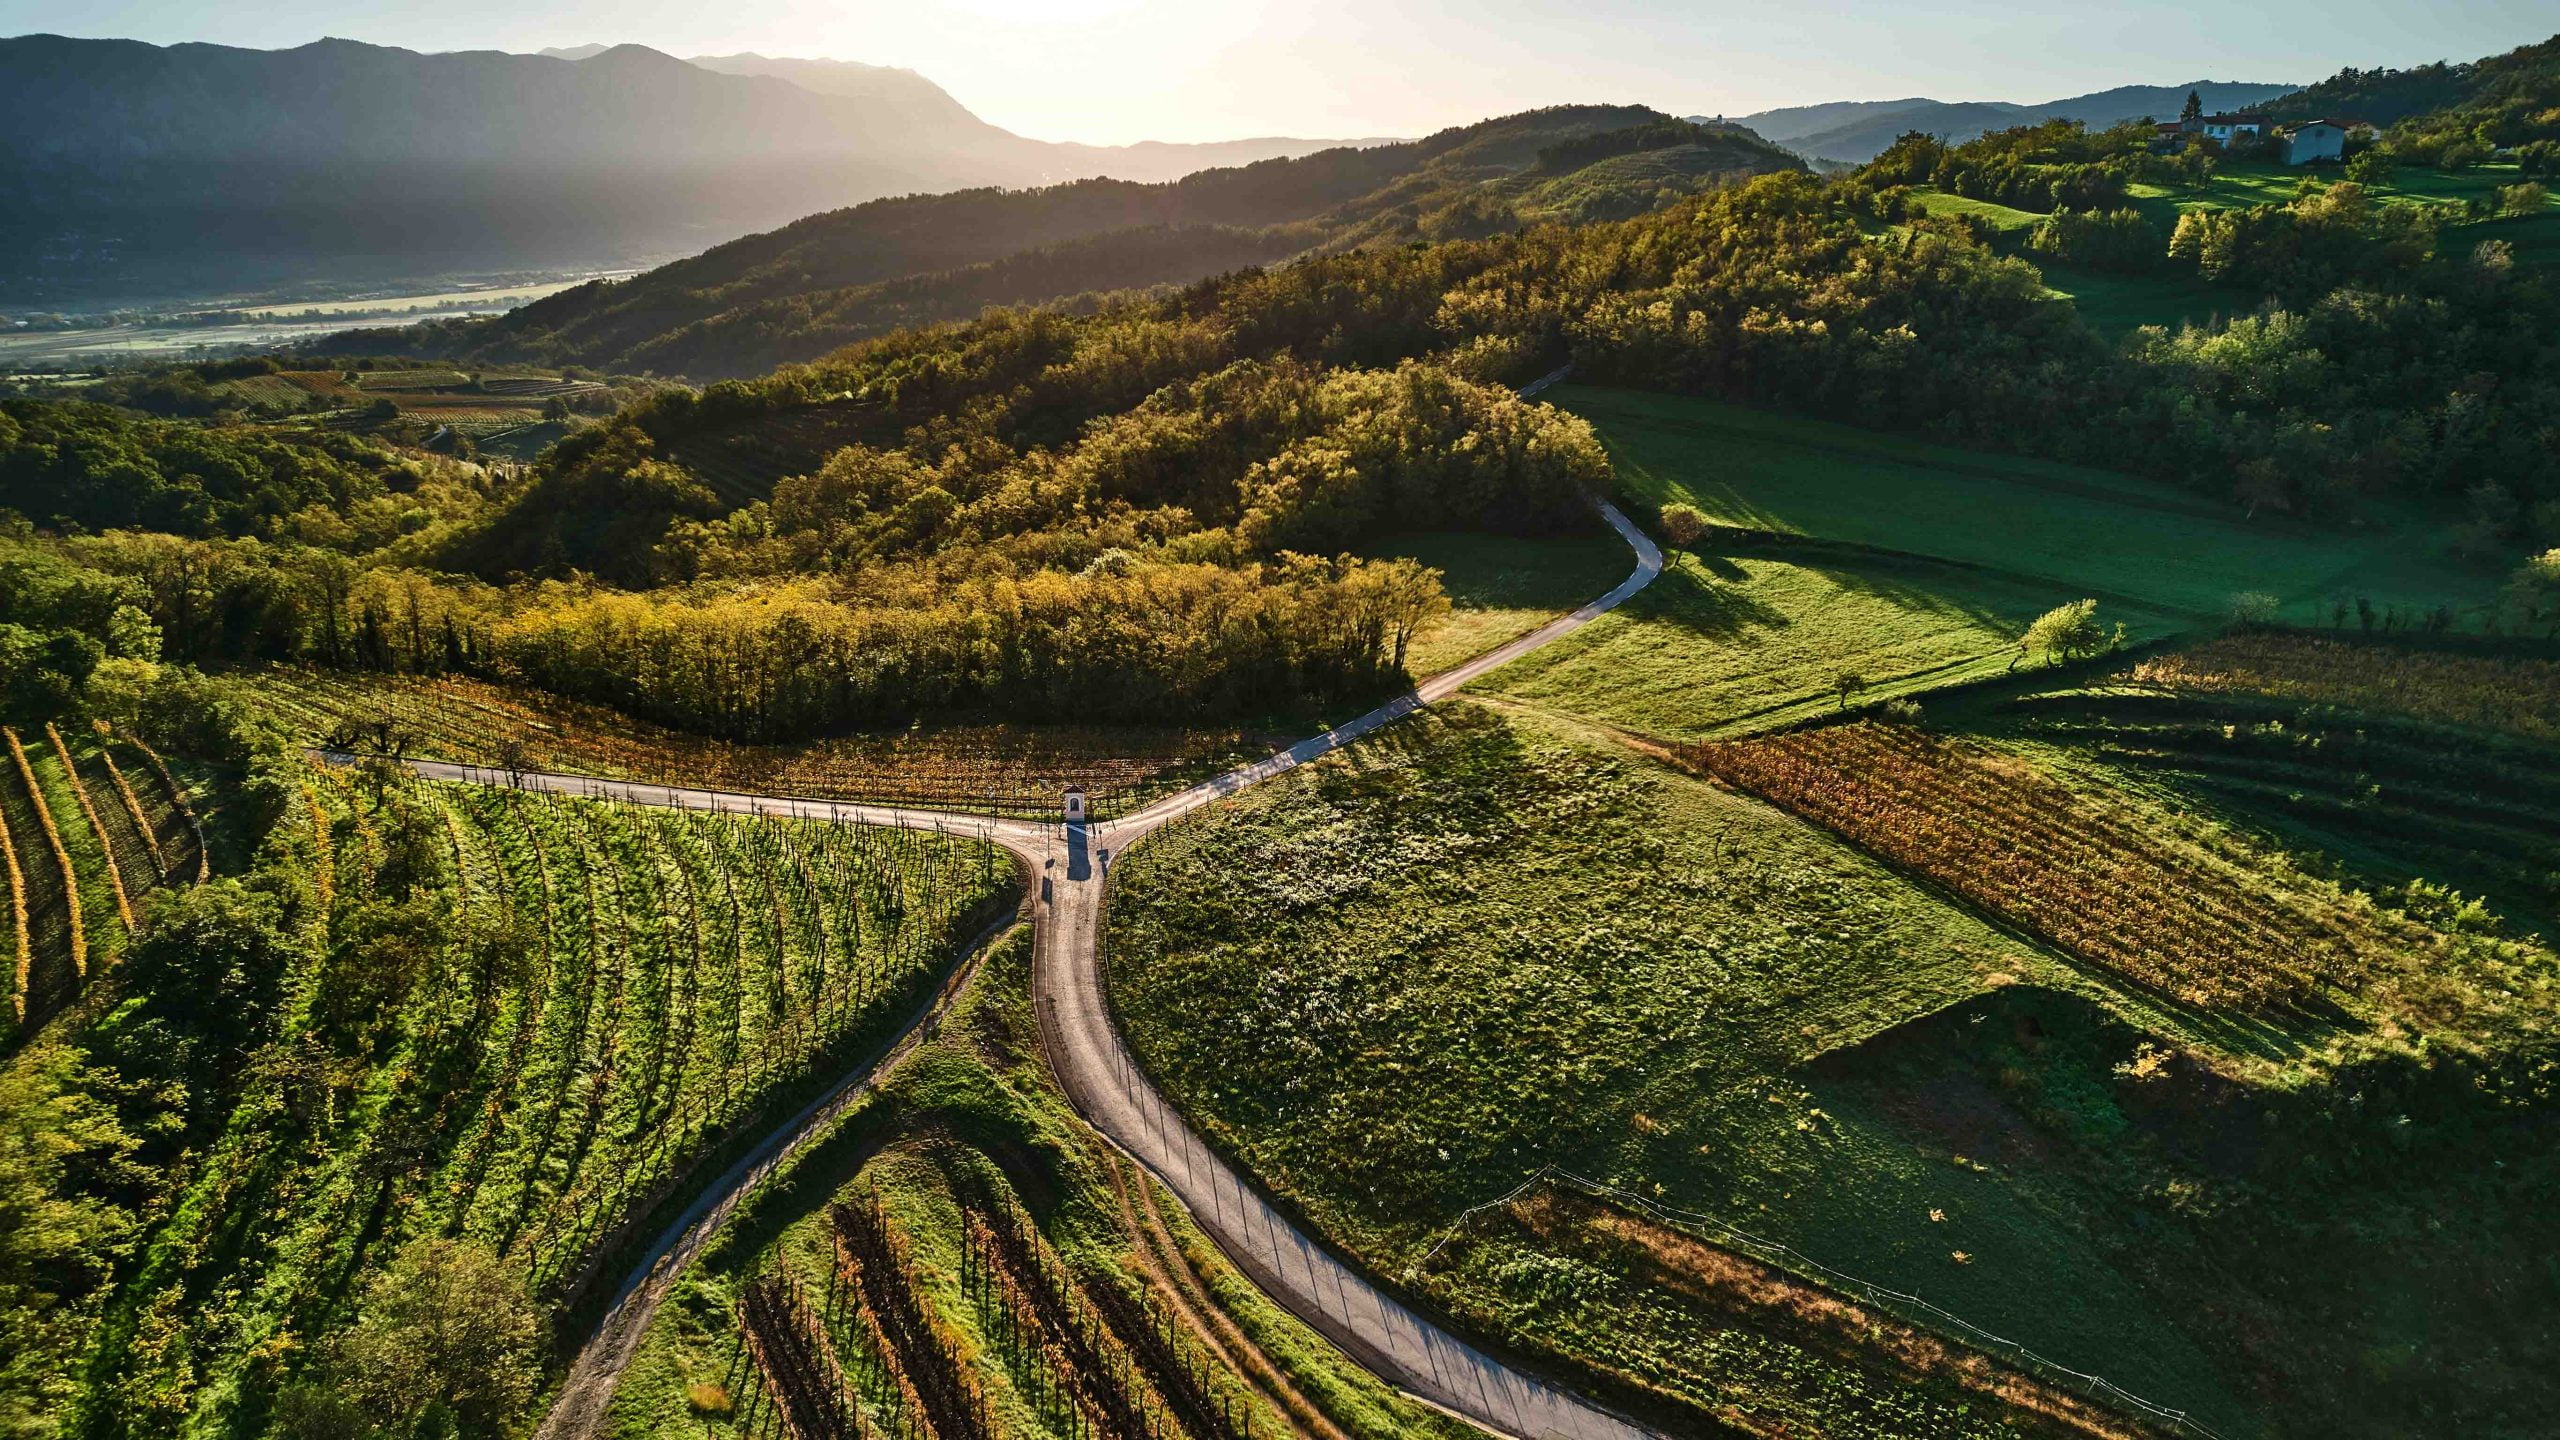 Vipava Valley's vineyards are beautiful to cycle through